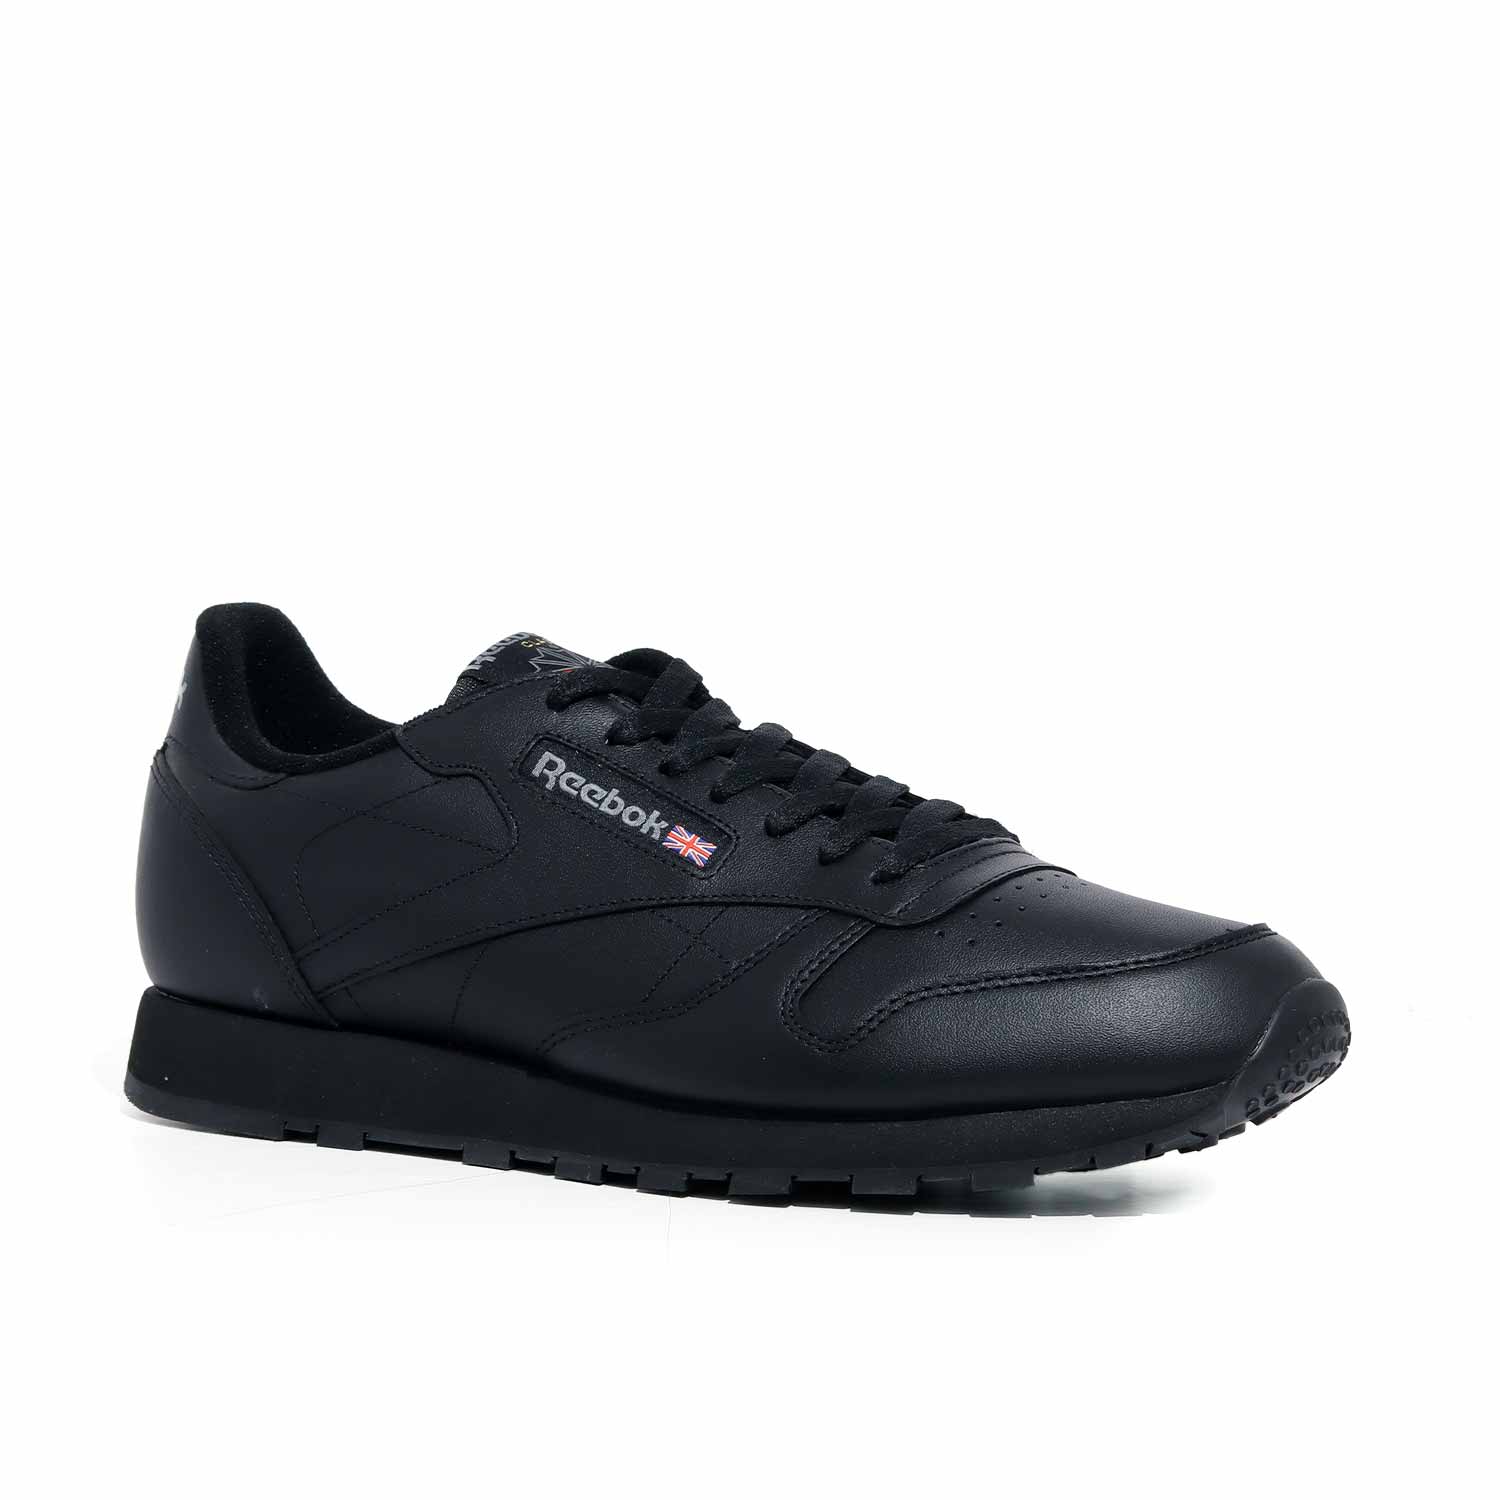 Tenis Reebok Leather Hombre R002267 Casual Negro